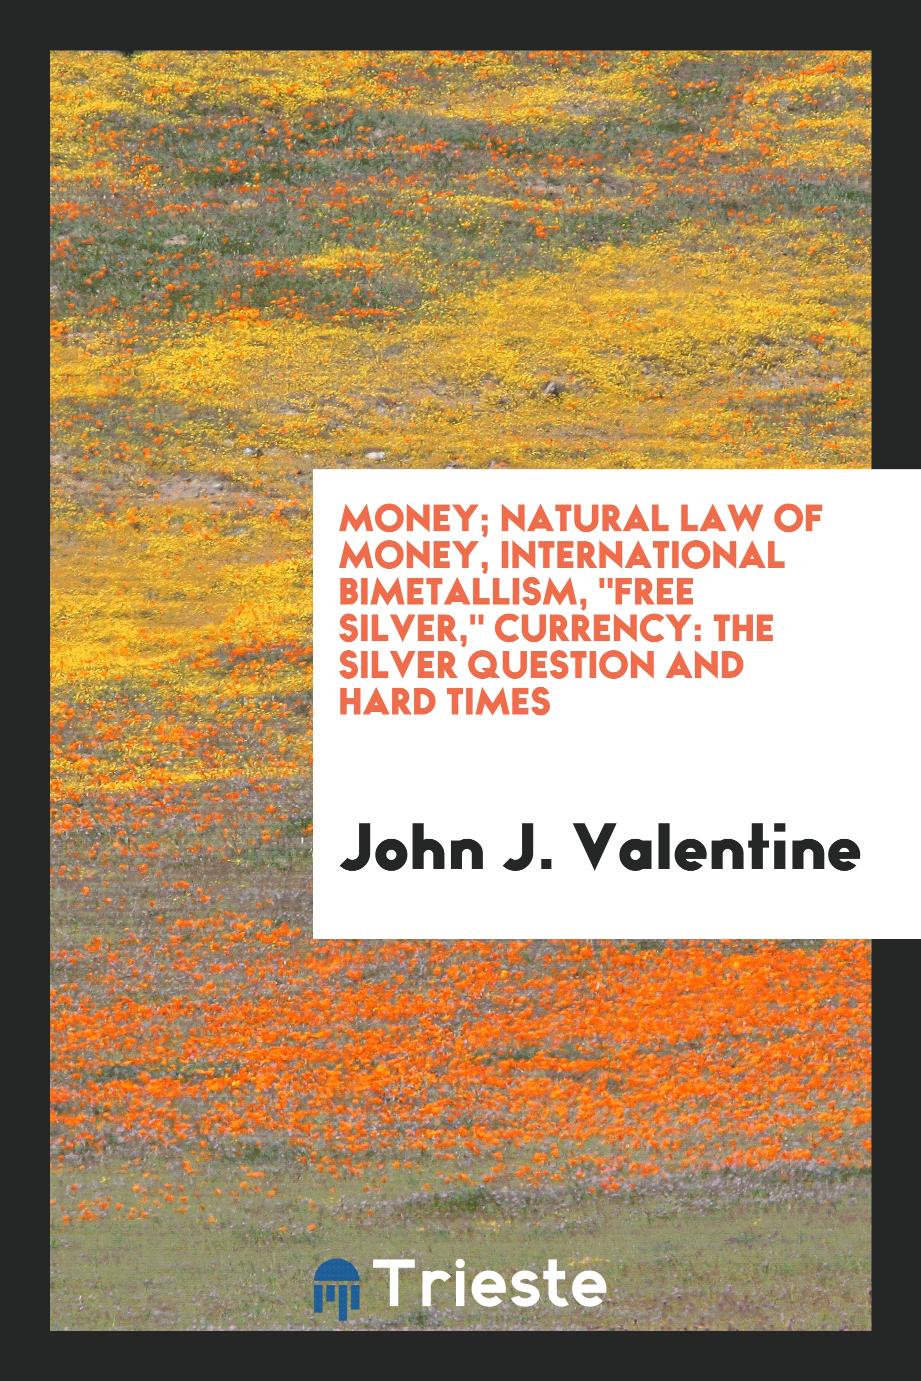 Money; natural law of money, international bimetallism, "free silver," currency: the silver question and hard times